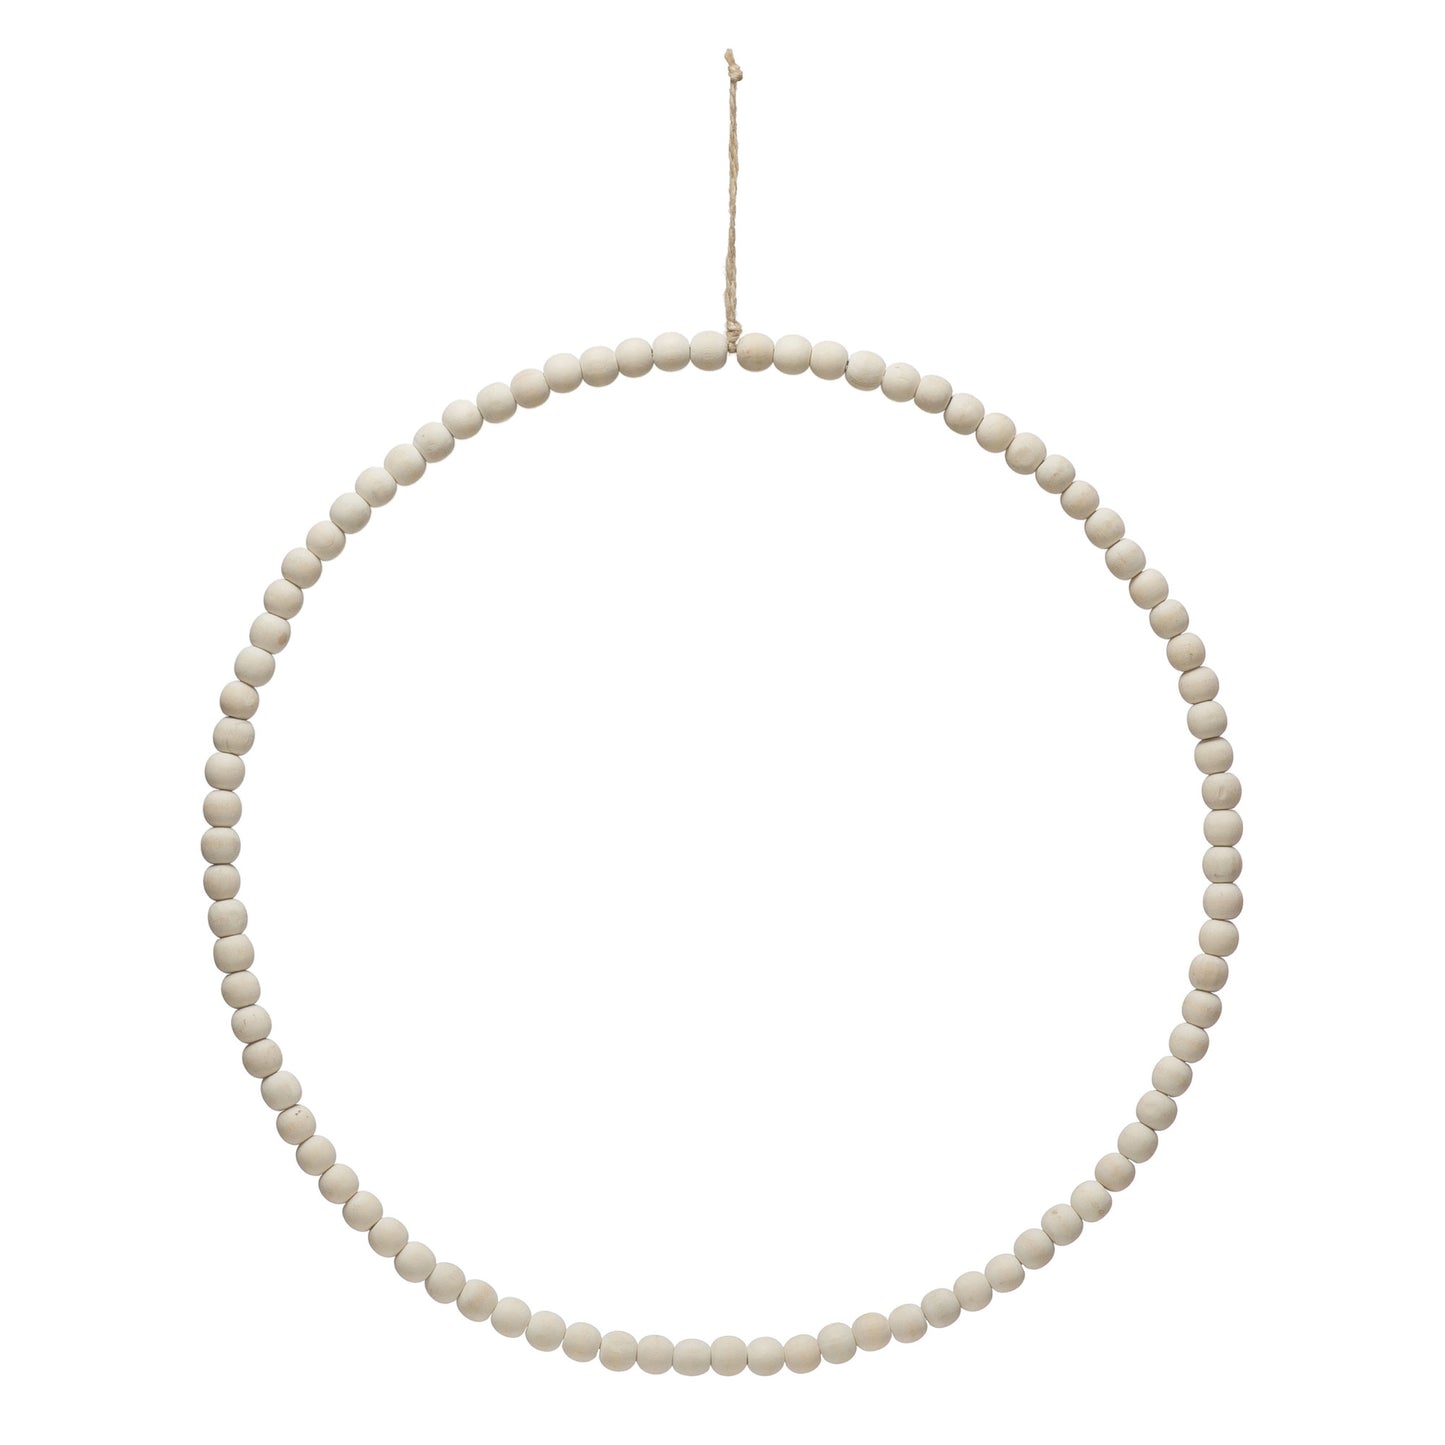 Creative Co-op Metal with Wood Beads Wreath - White 